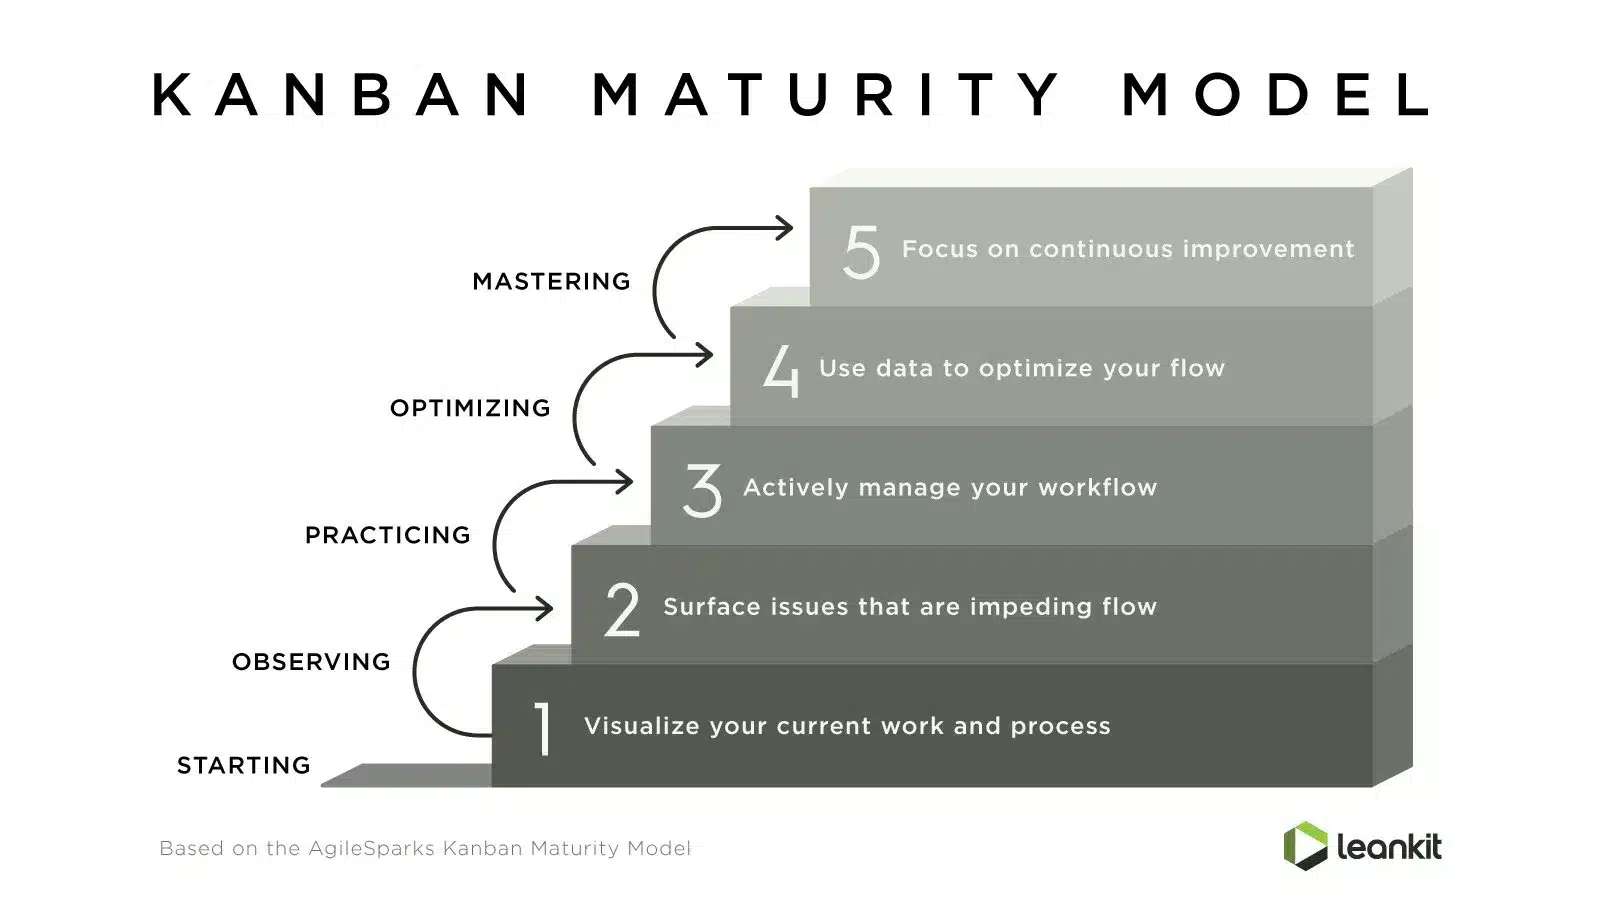 What is the Agile marketing Kanban maturity model? Steps include starting, observing, practicing, optimizing, and mastering